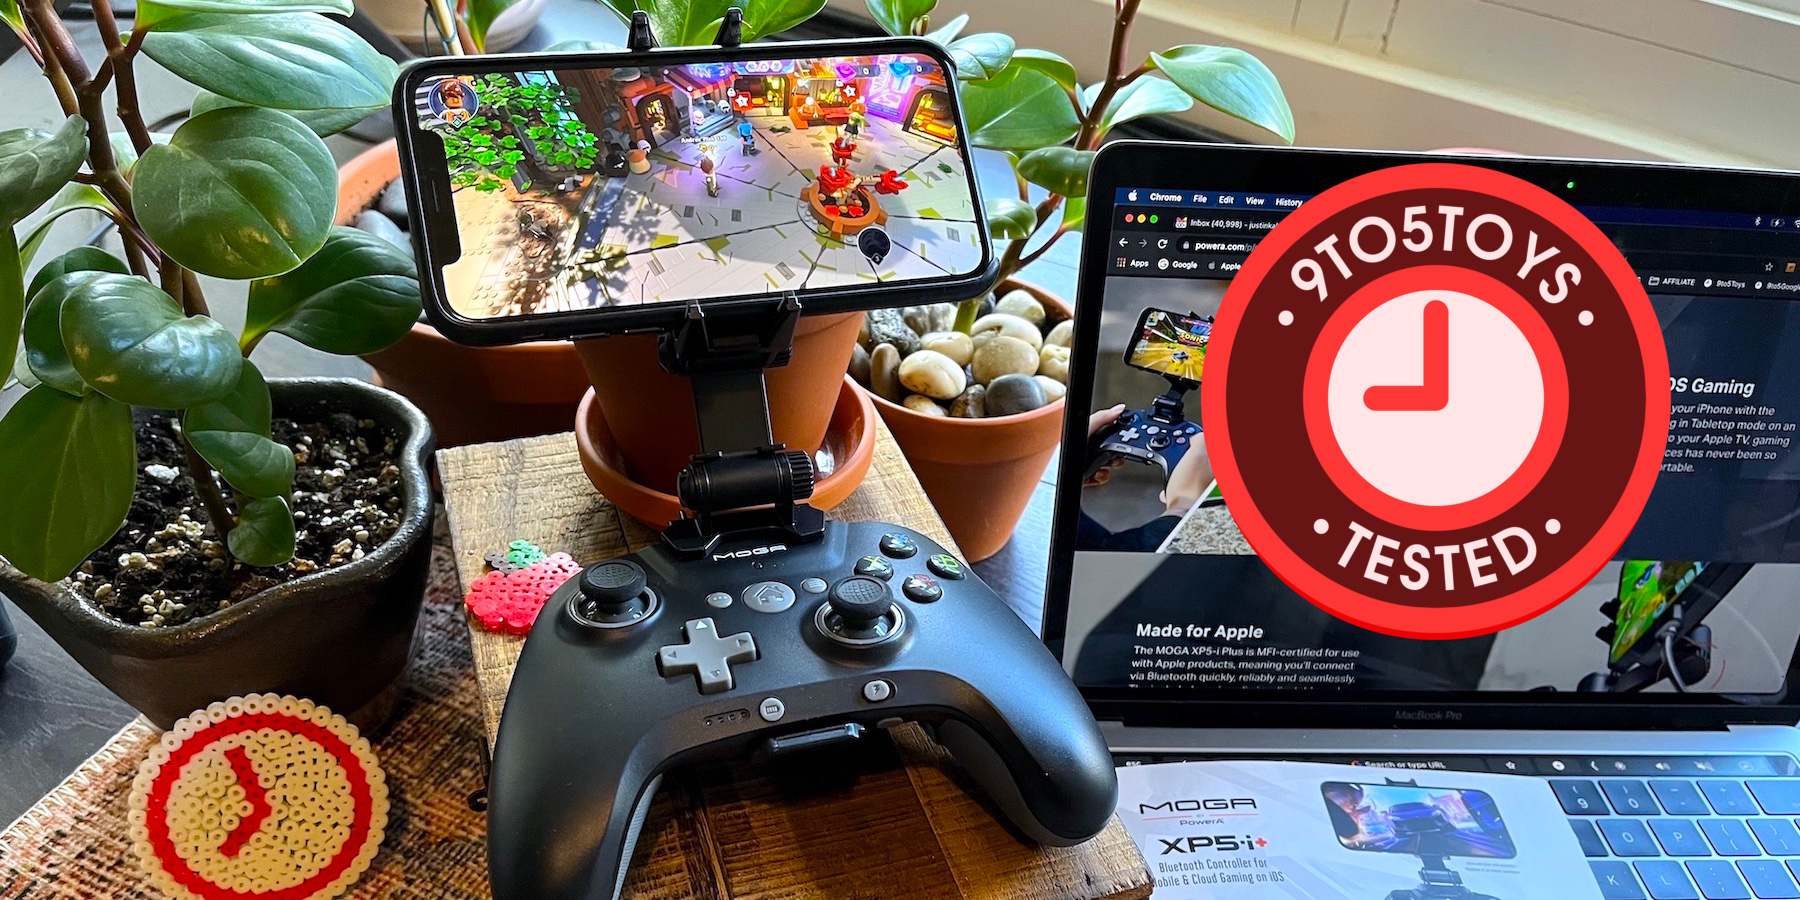 xcloud-hands-on-impressions-with-power-as-moga-xp5-x-plus-bluetooth-controller-culture-of-gaming